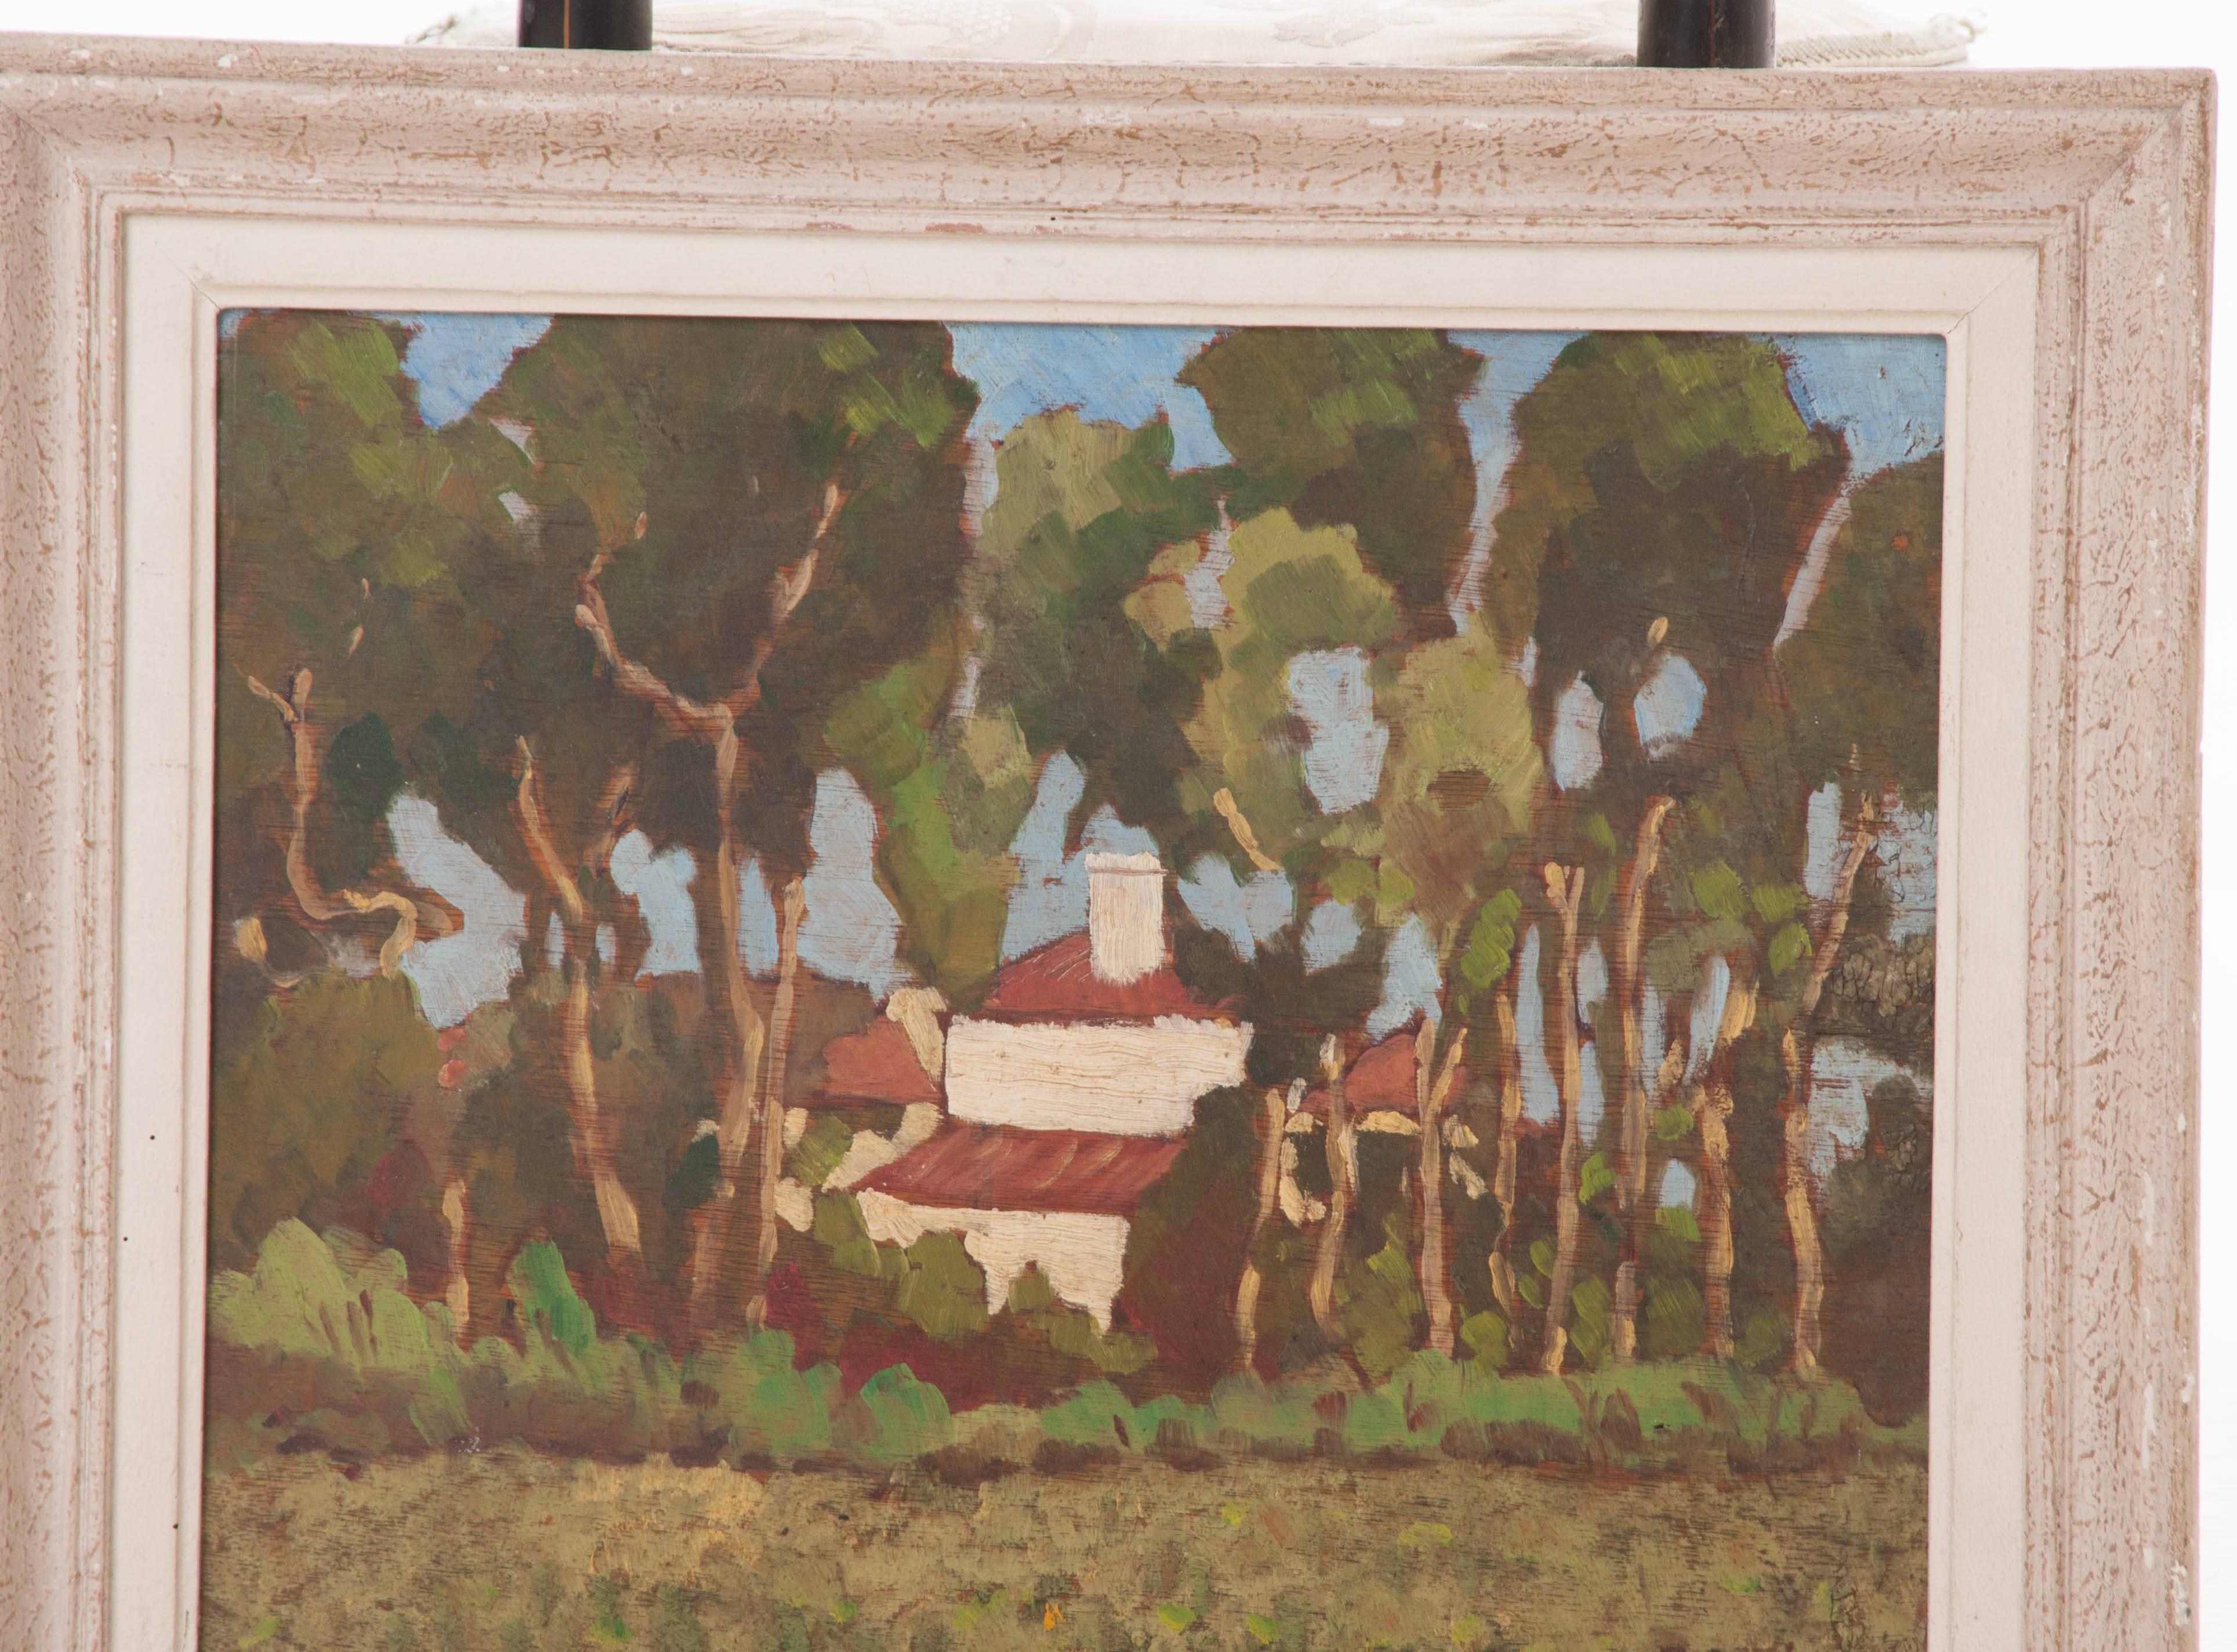 Oil on wood panel. Pastoral landscape depicting a homestead through a line of trees. Frame is painted antiqued white with gold texture. Signed by artist.